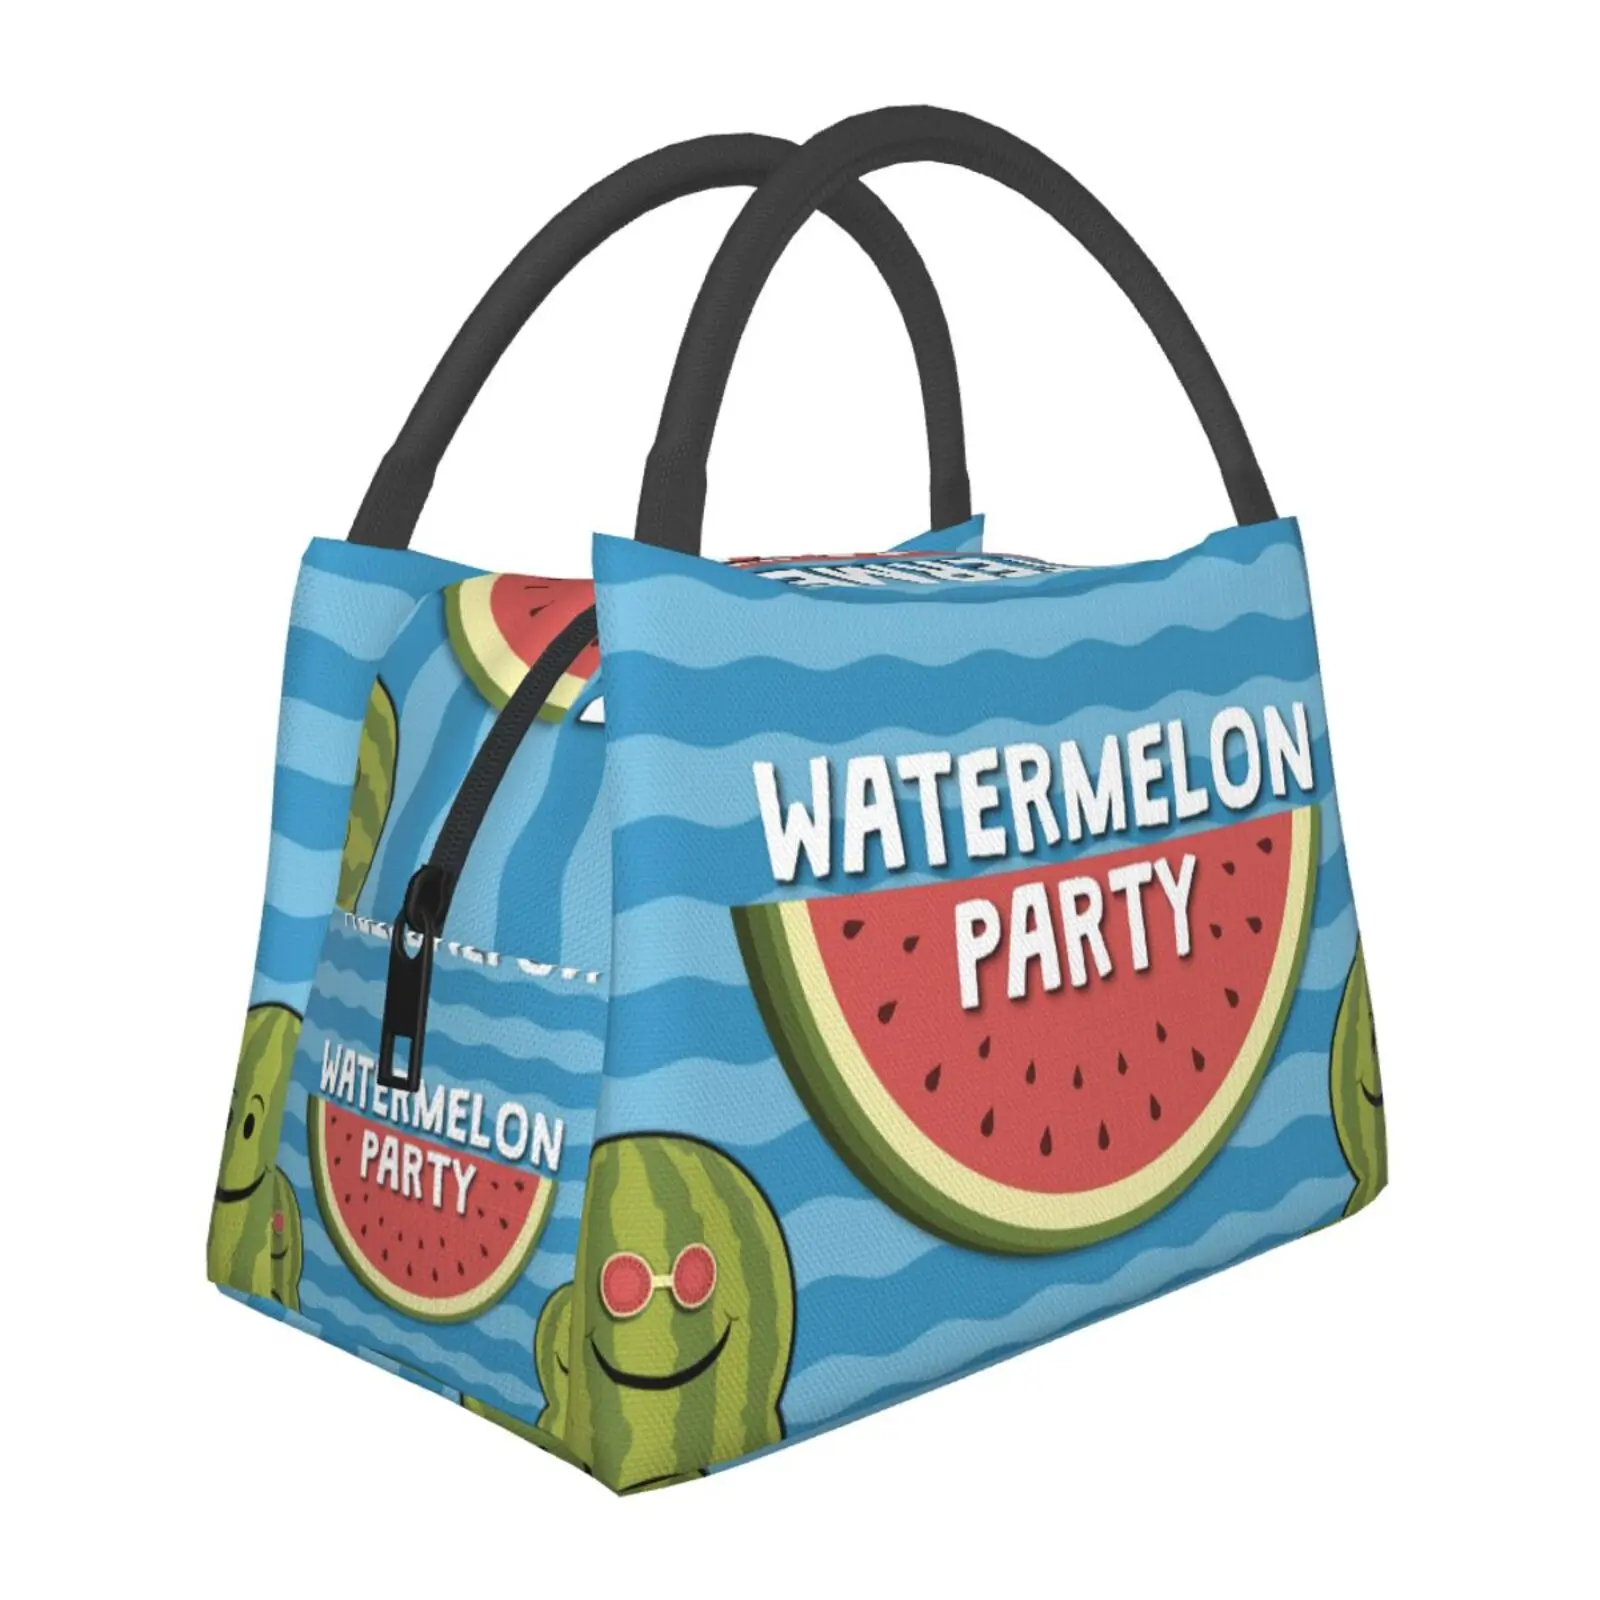 Watermelon Party Summer Lunch Bag Bento Insulated Bag Cooler Bags for Kids Women Tote Bag for Outdoor Shcool Work Picnic